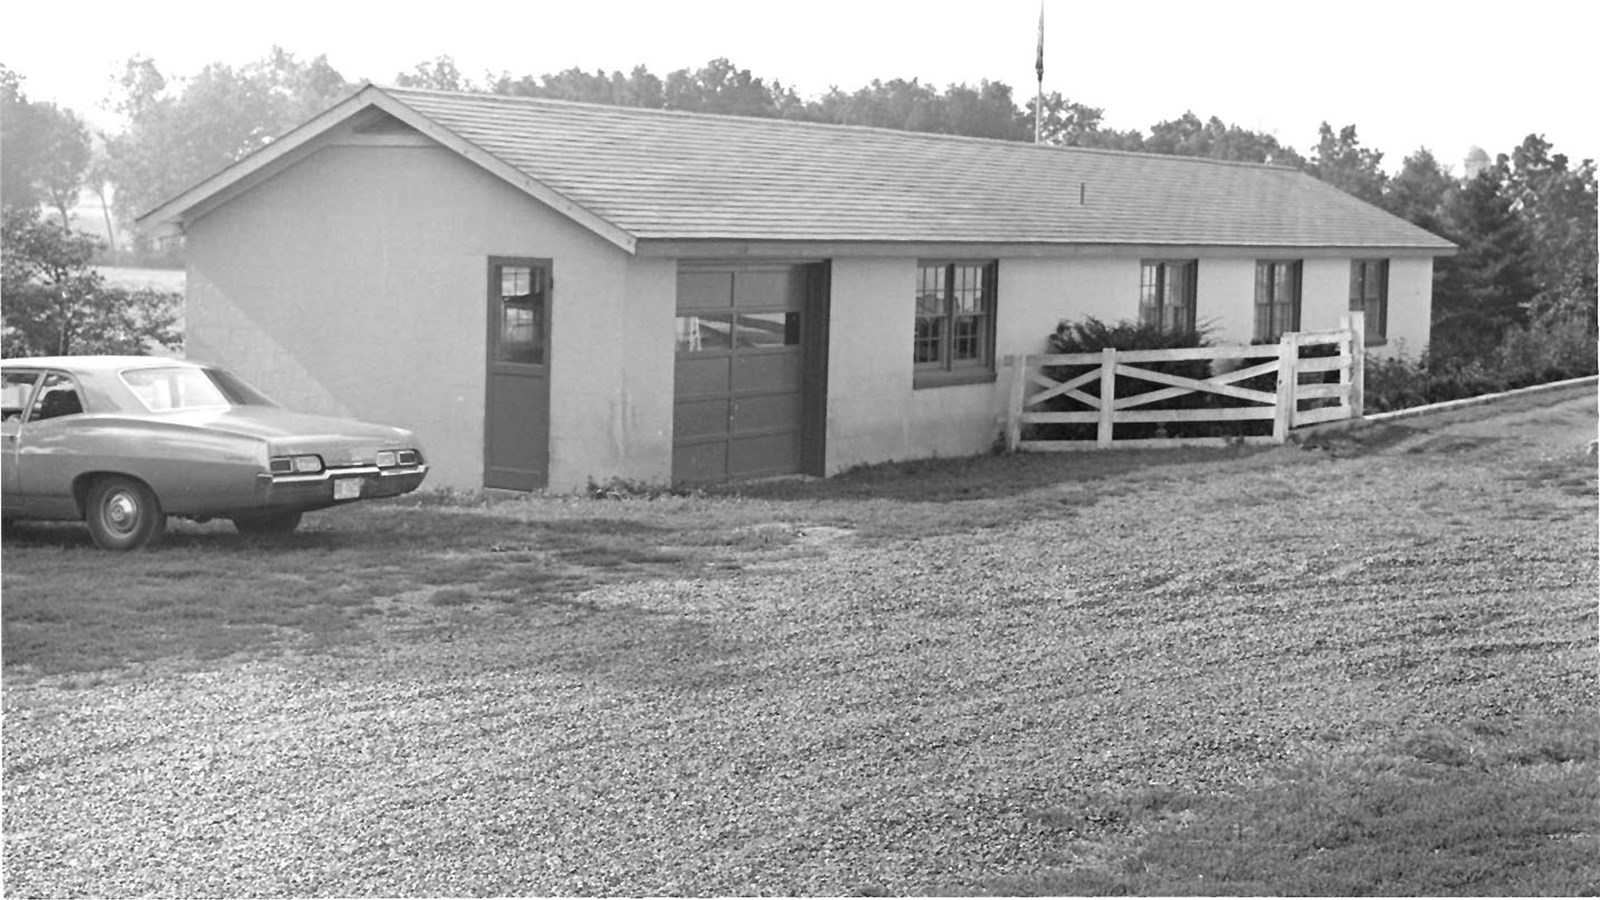 A black and white image showing a long rectangular building, with a 1960’s automobile.